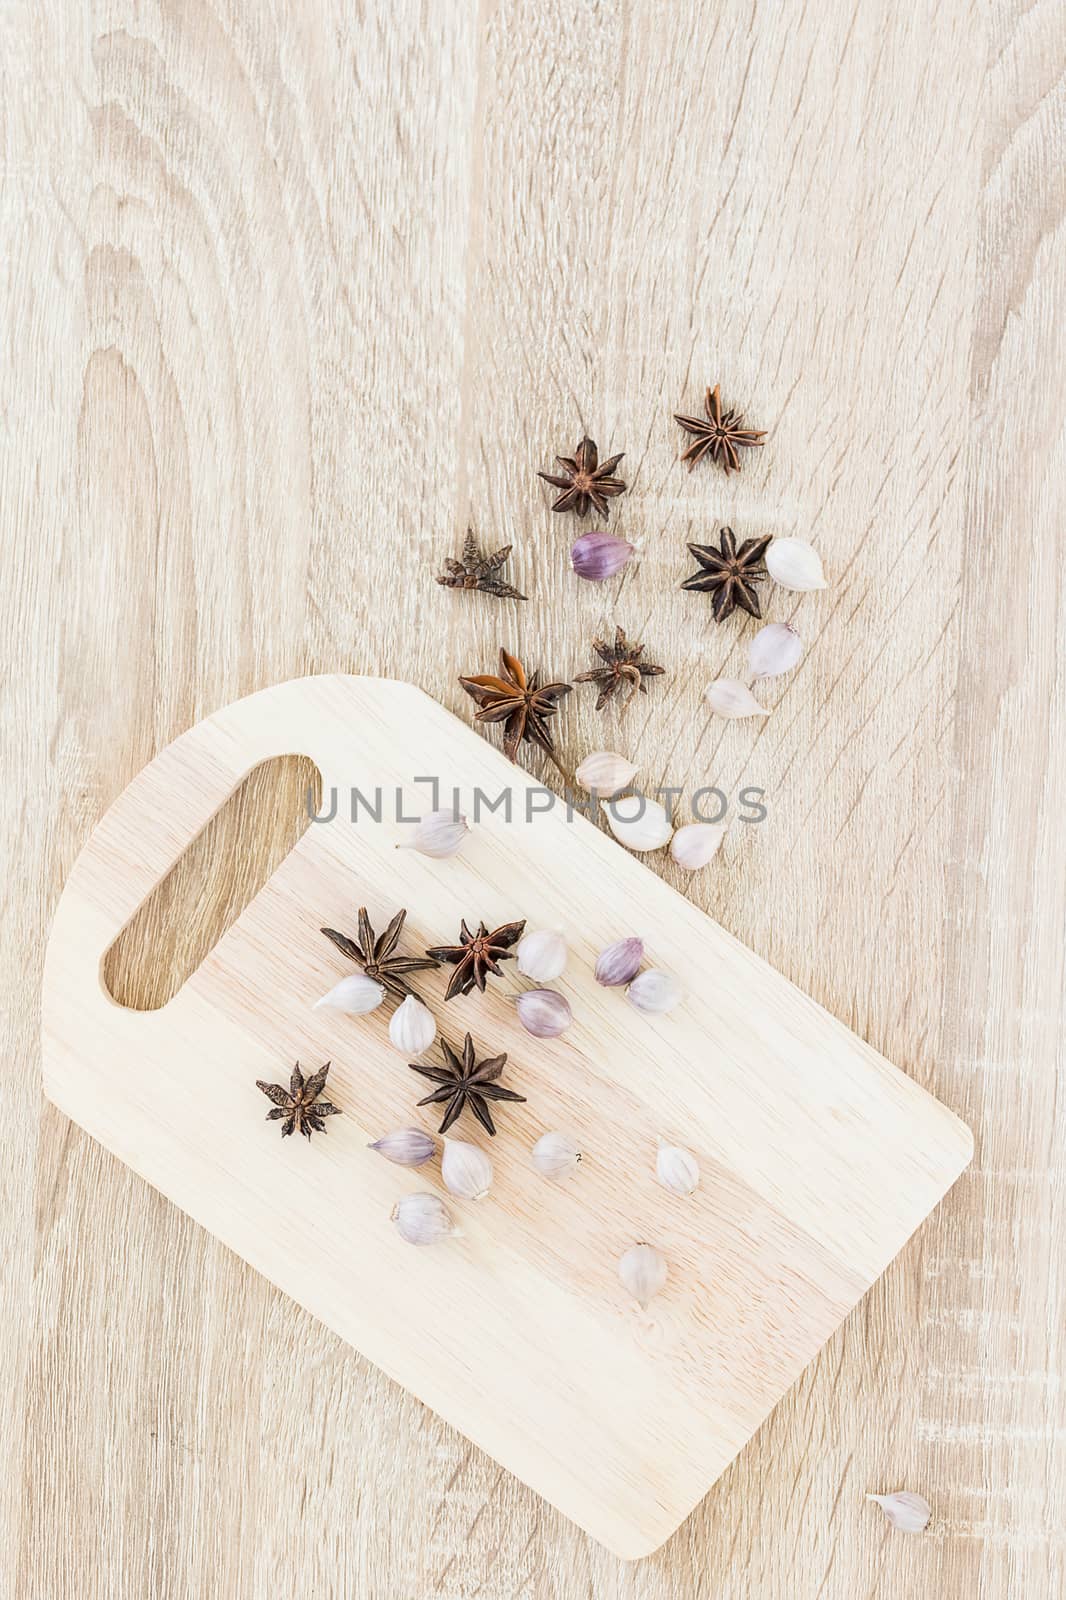 Star anise spice fruits and seed and garlic on wood chopping board and wood table from above